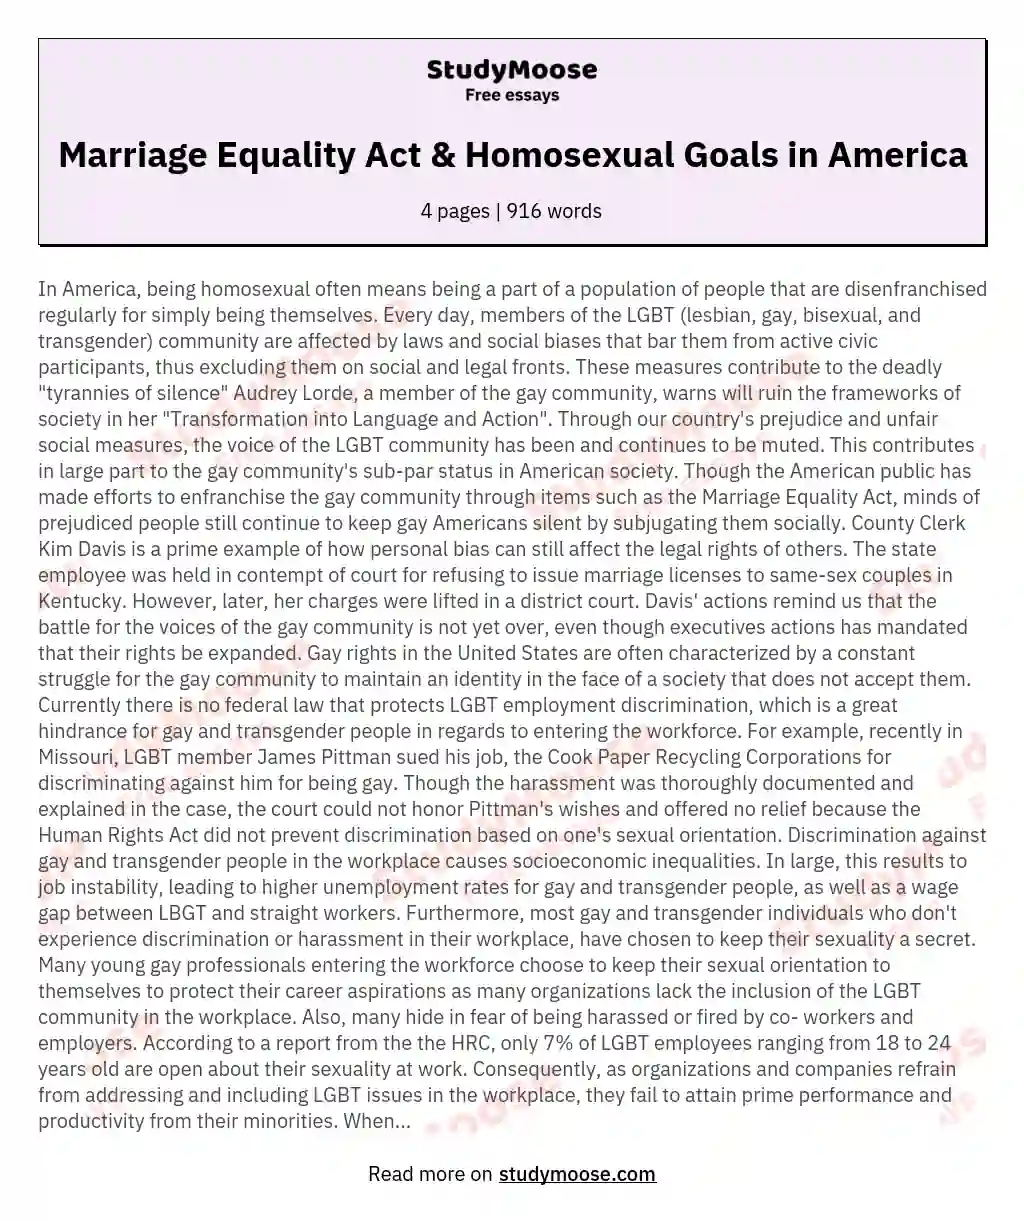 Marriage Equality Act & Homosexual Goals in America essay